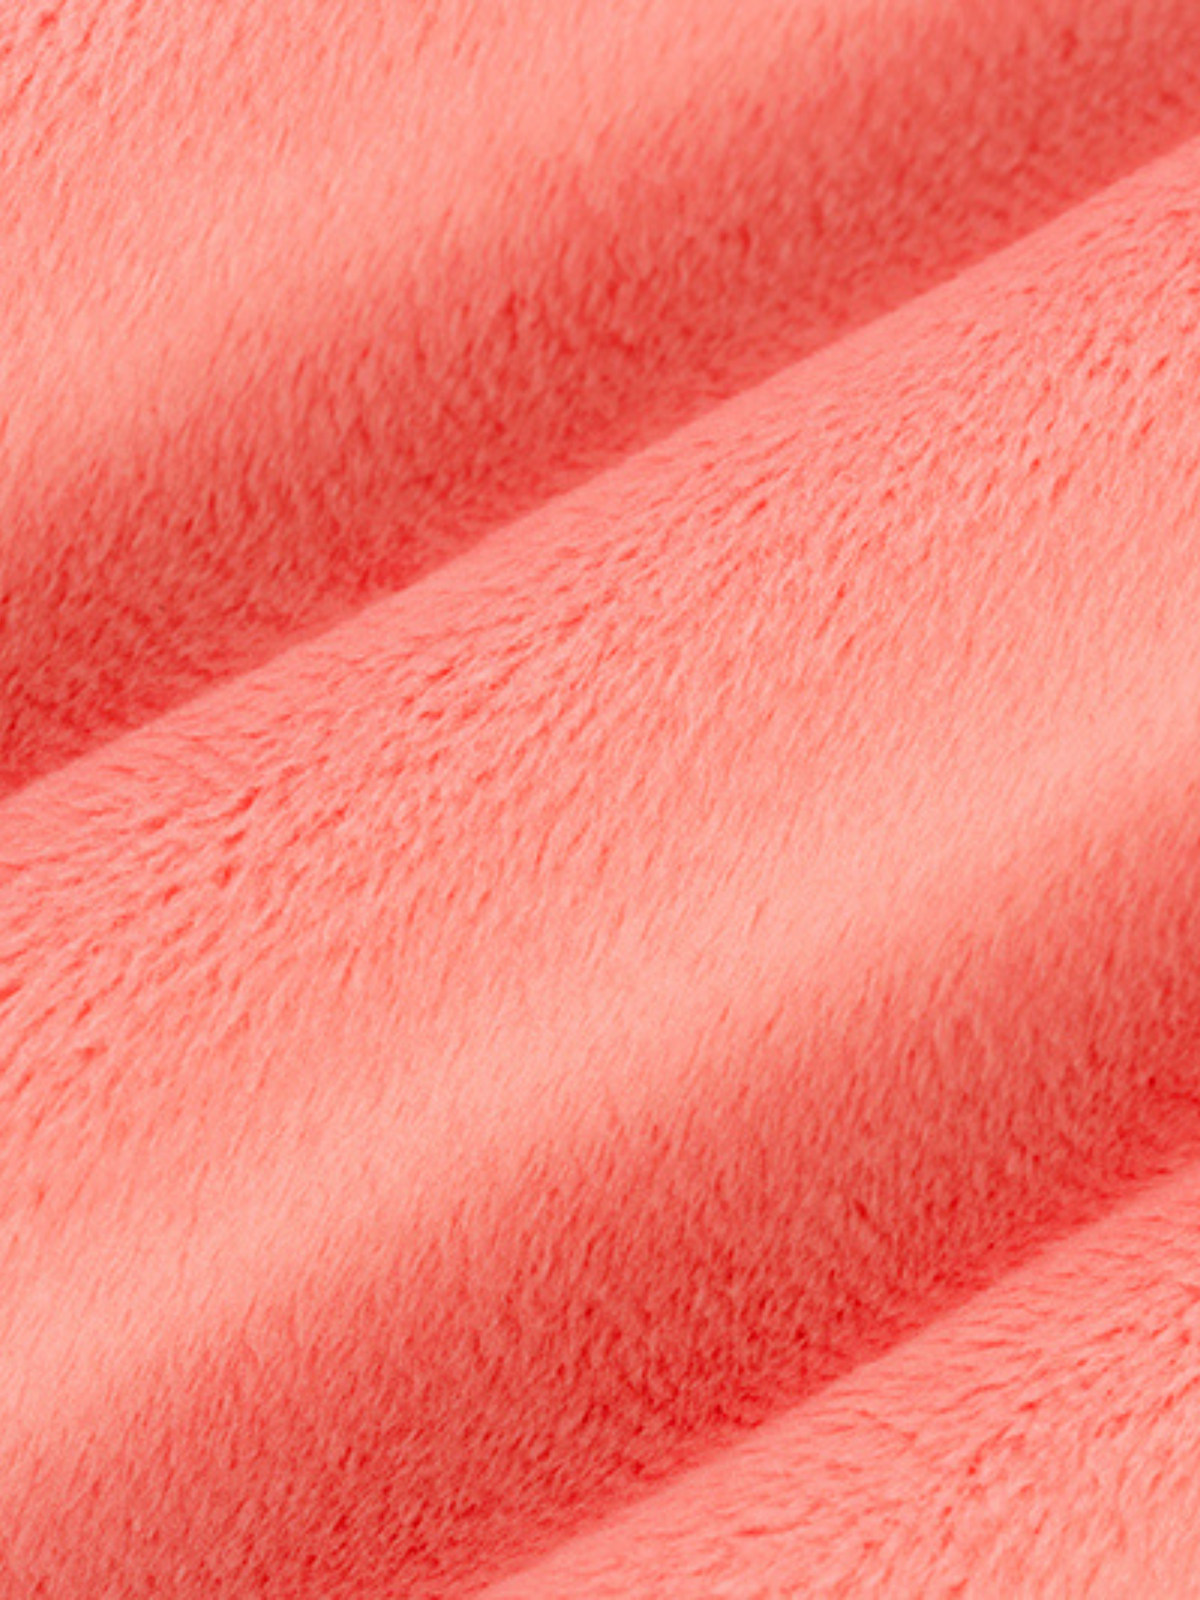 Fitted Sheet - Coral Minky Sheet : All Sizes - DBC Baby Bedding Co 